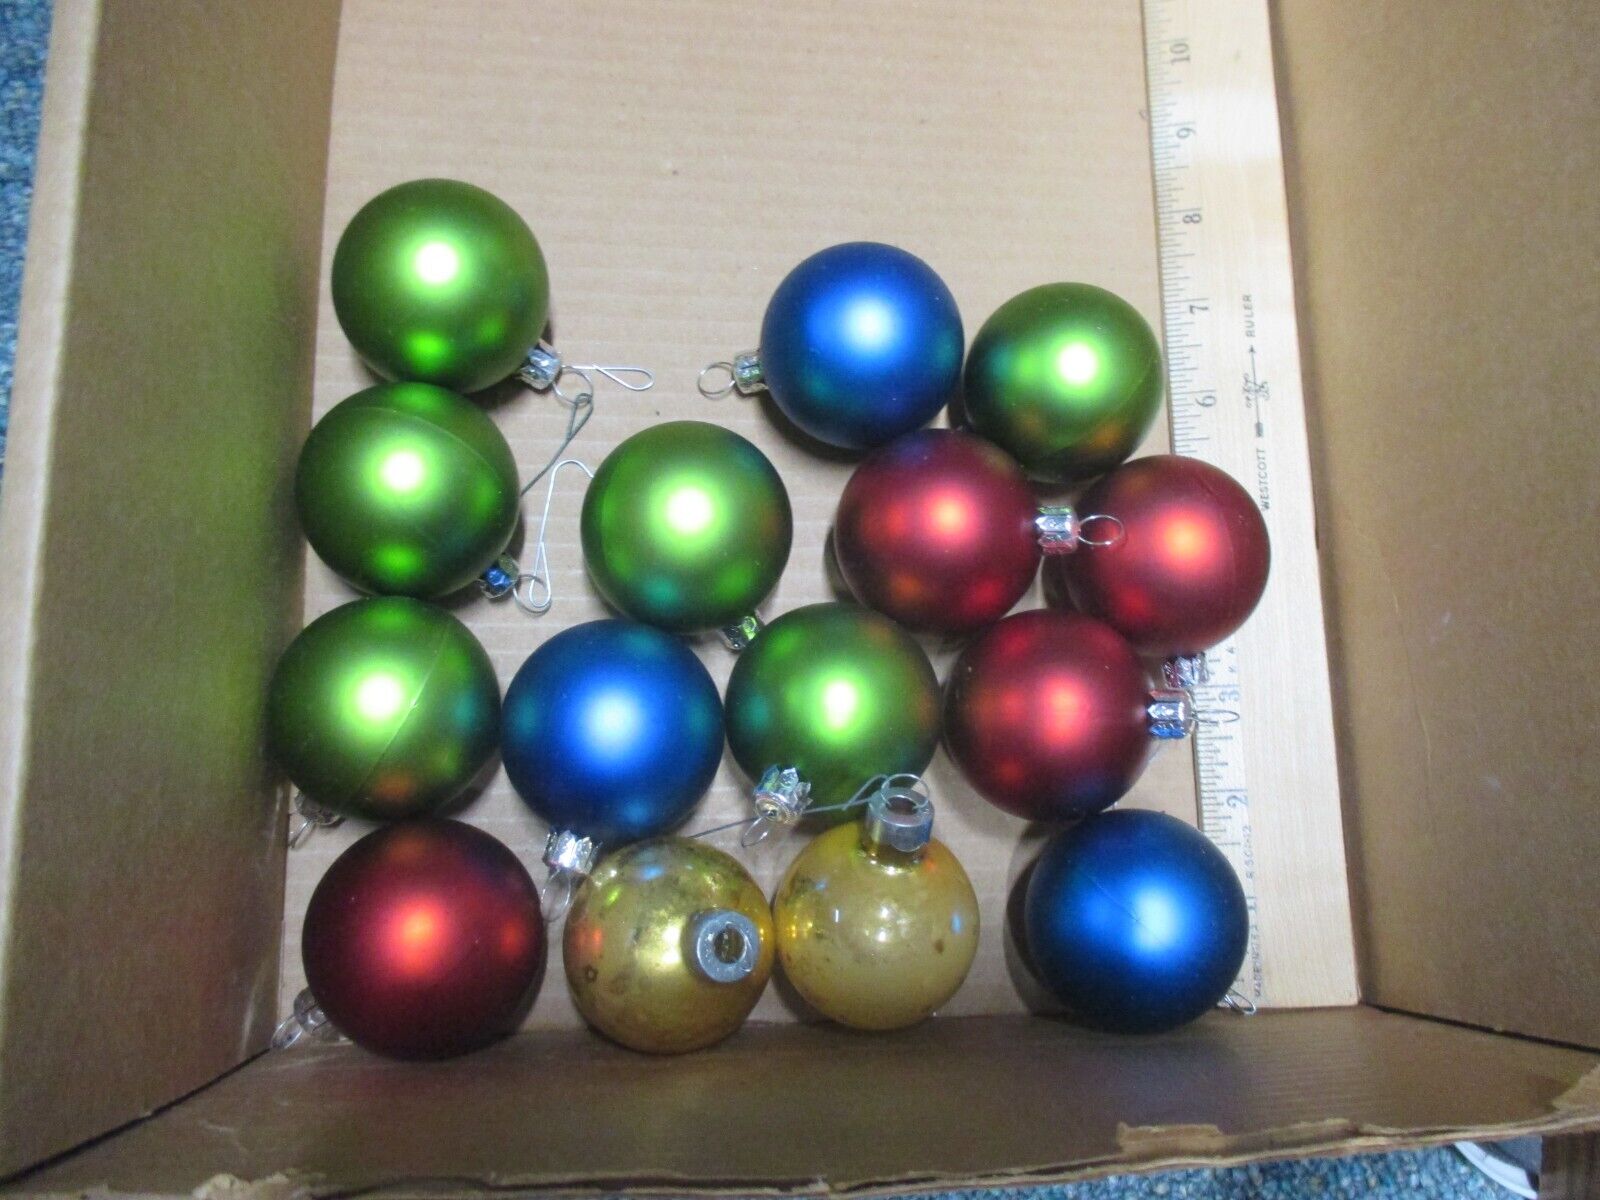 15 Vintage Christmas Ornaments Glass Ball Ornaments 2” inches Tall